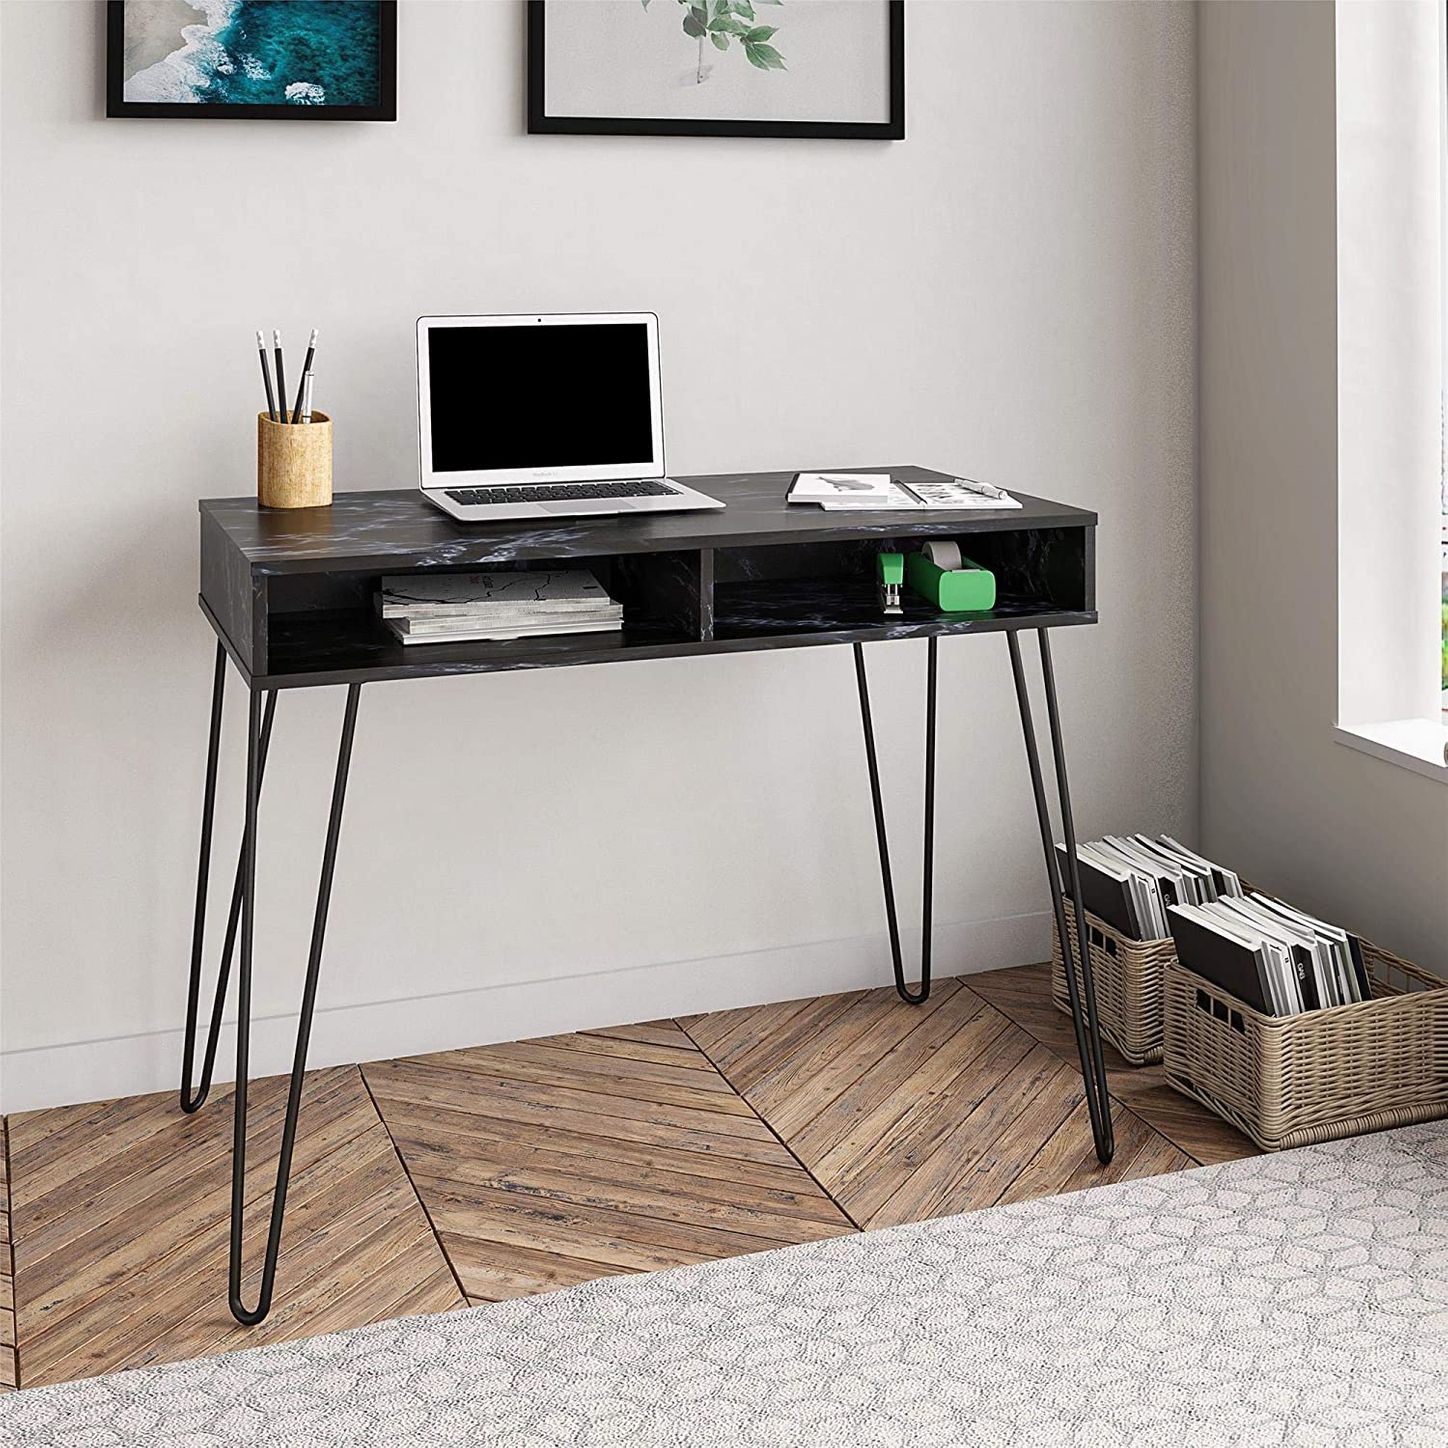 11 Lap Desks For Kids And Adults Who Want To Get Work Done